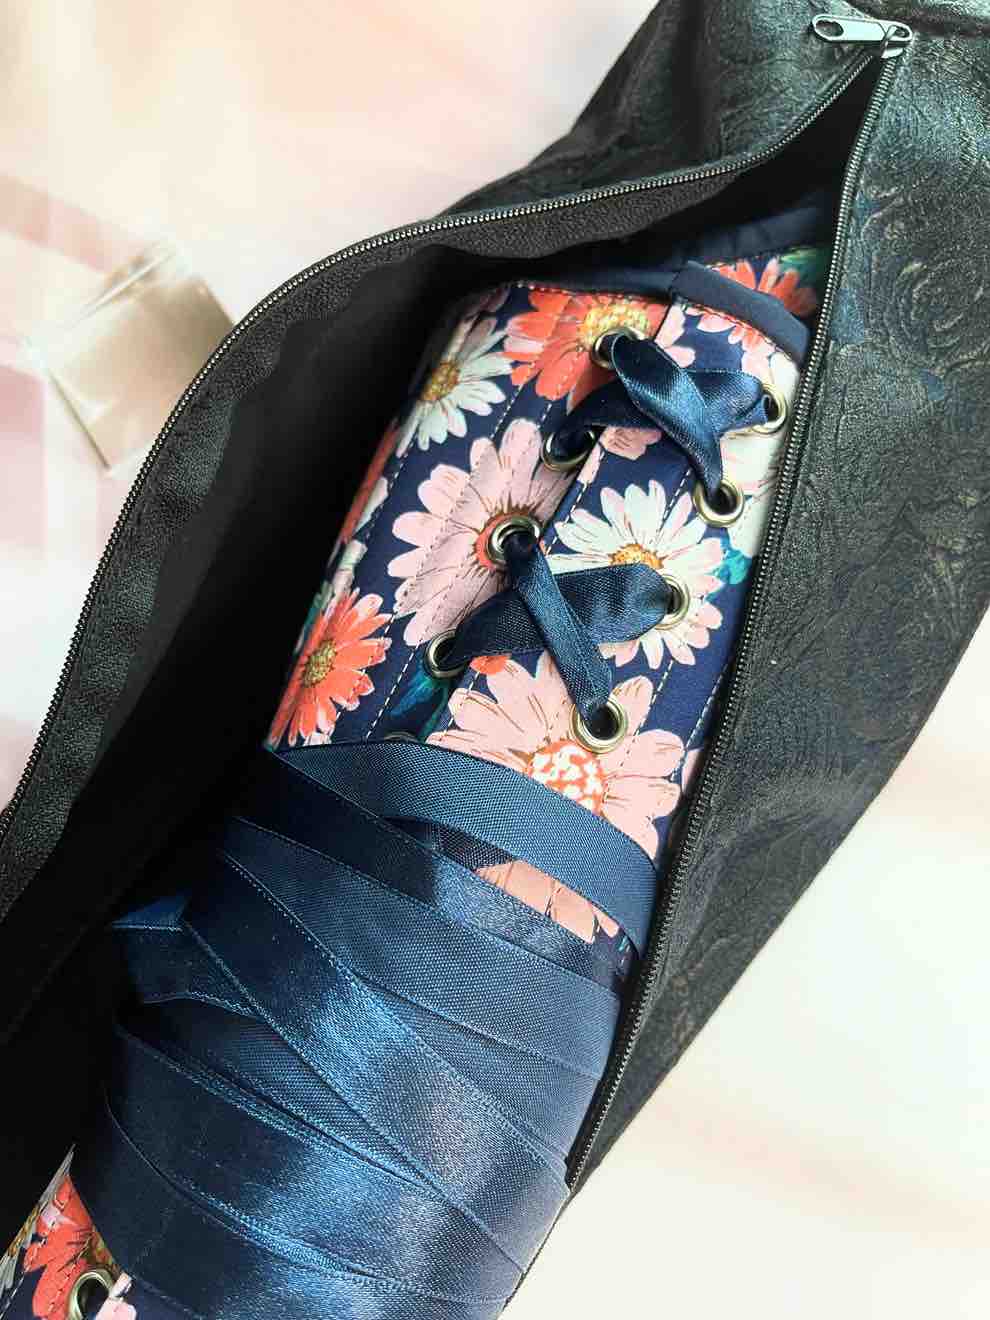 A corset with a flower pattern being placed into the black brocade Underbust Corset Bag.